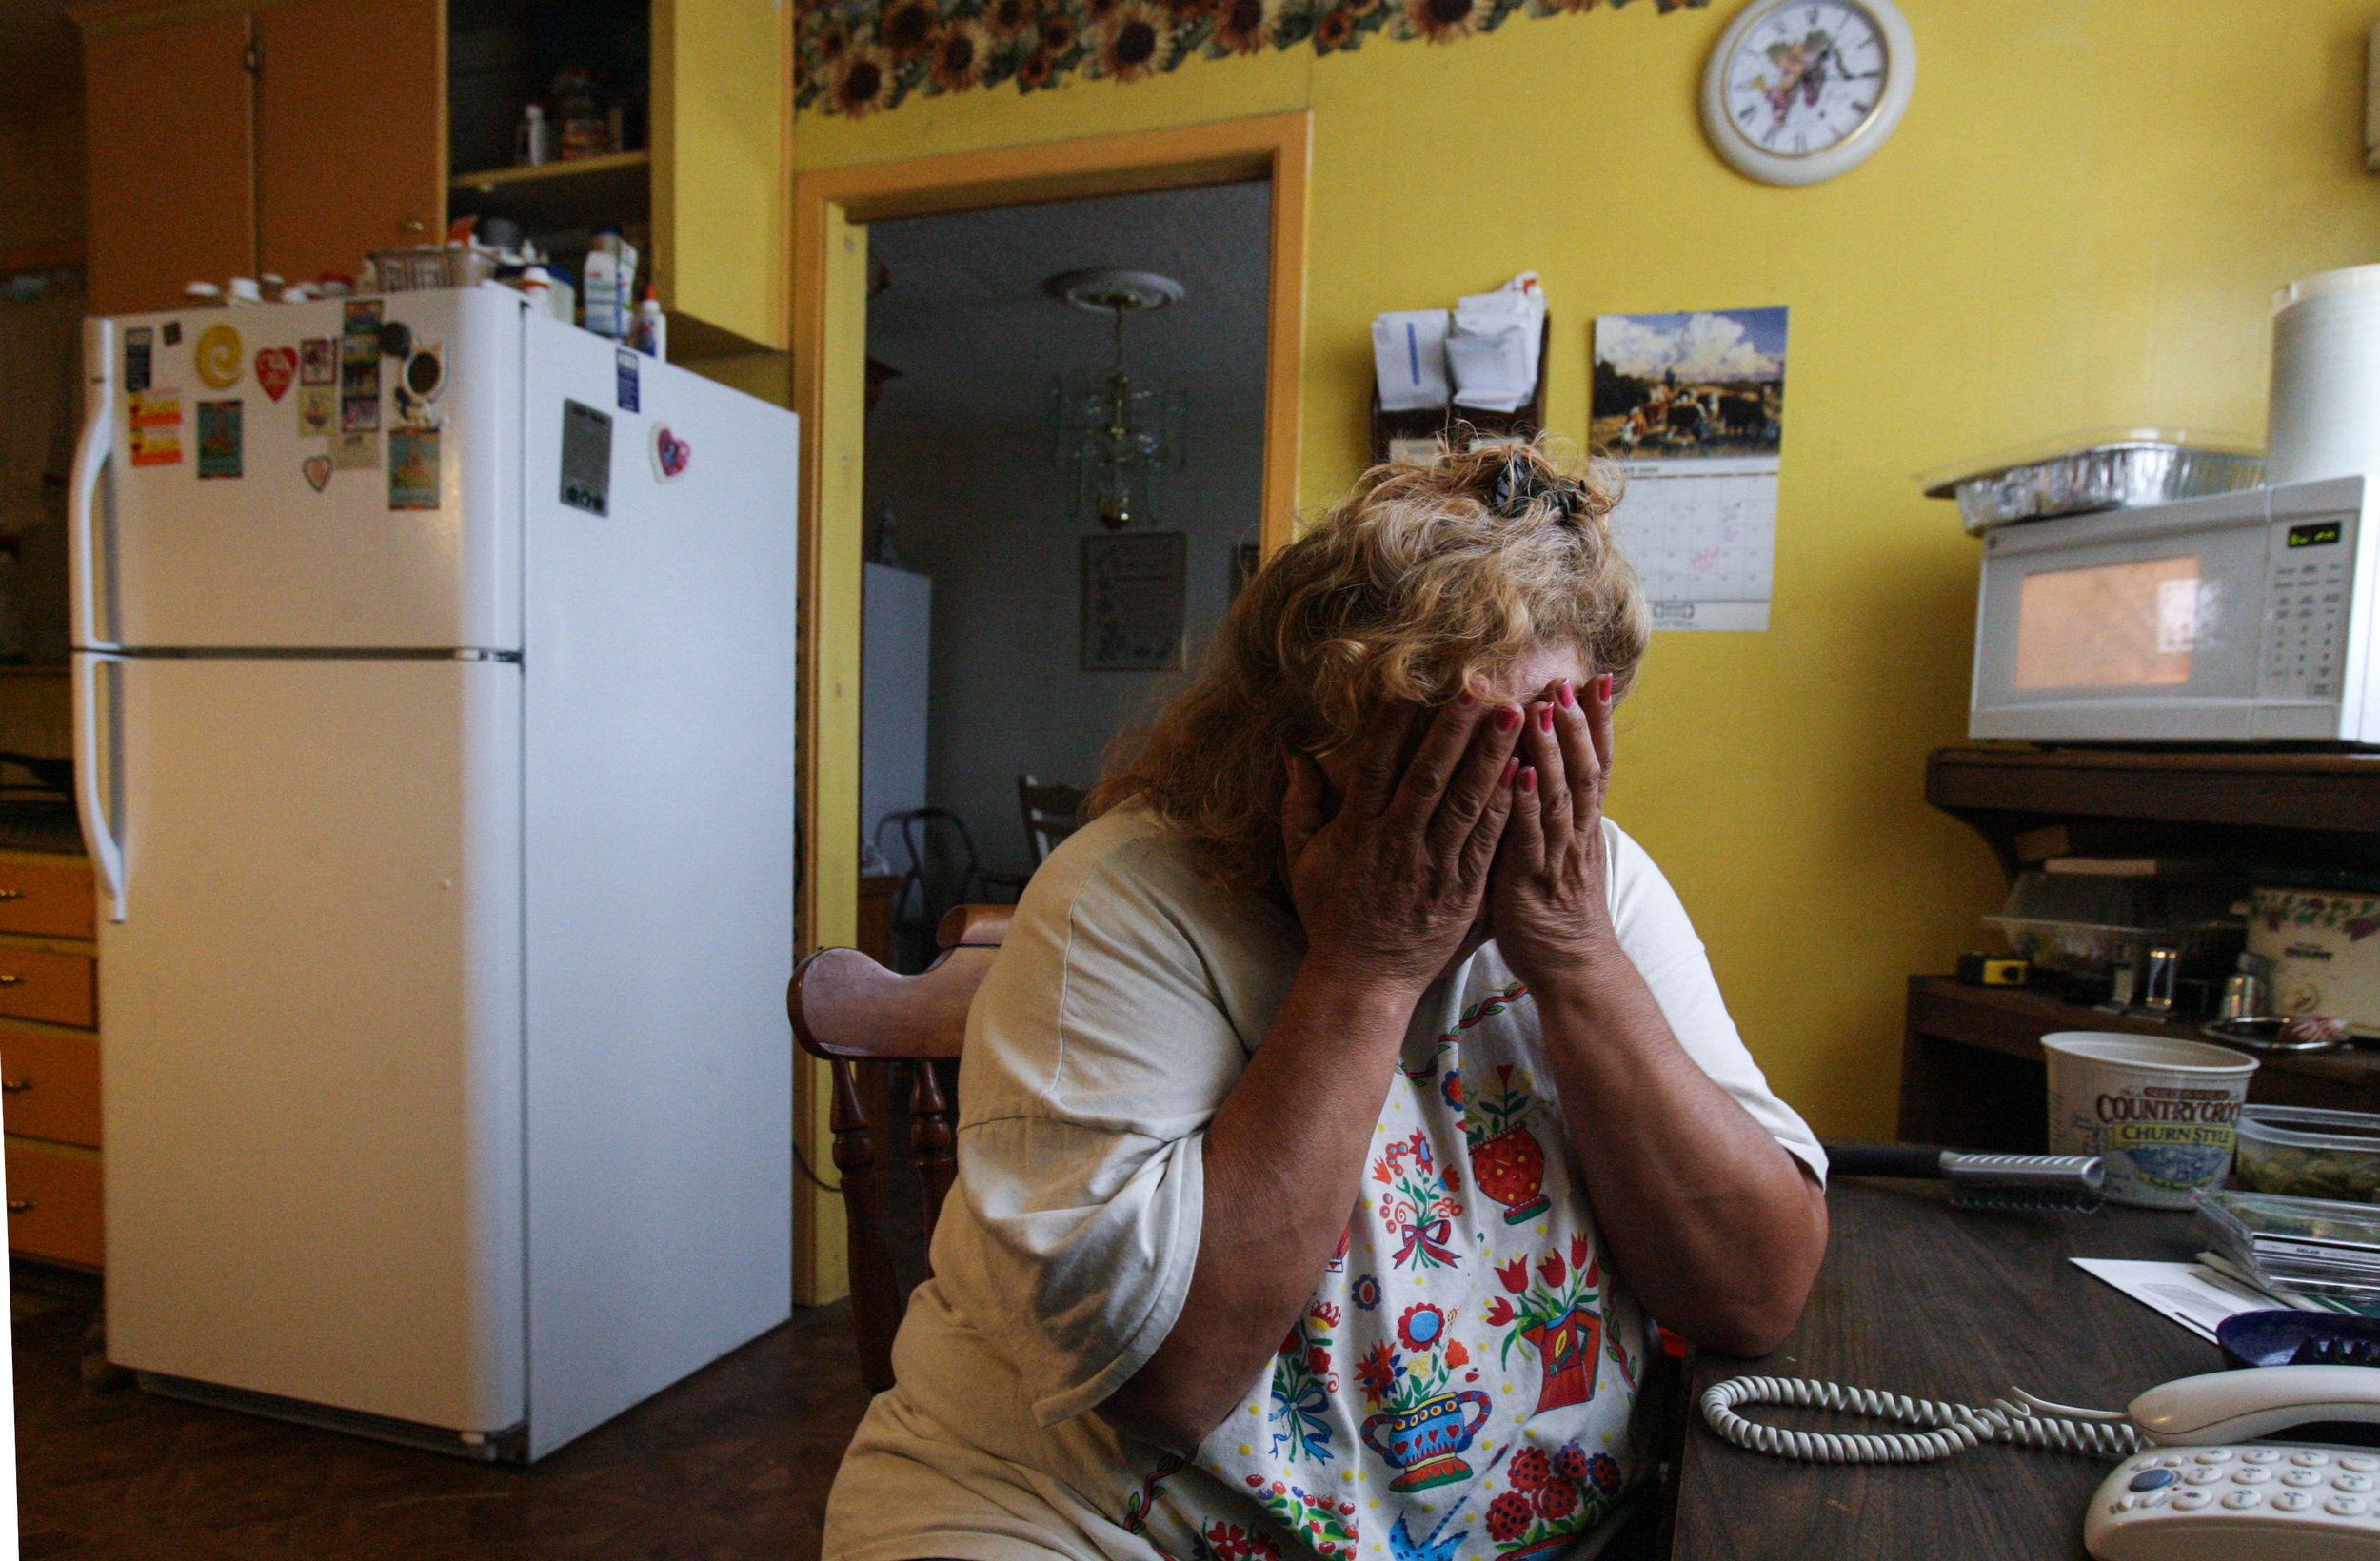  Juanita Torres reacts after learning during a phone call she was denied housing assistance Aug. 11, 2008, at her friend's house in Odessa, Texas. 